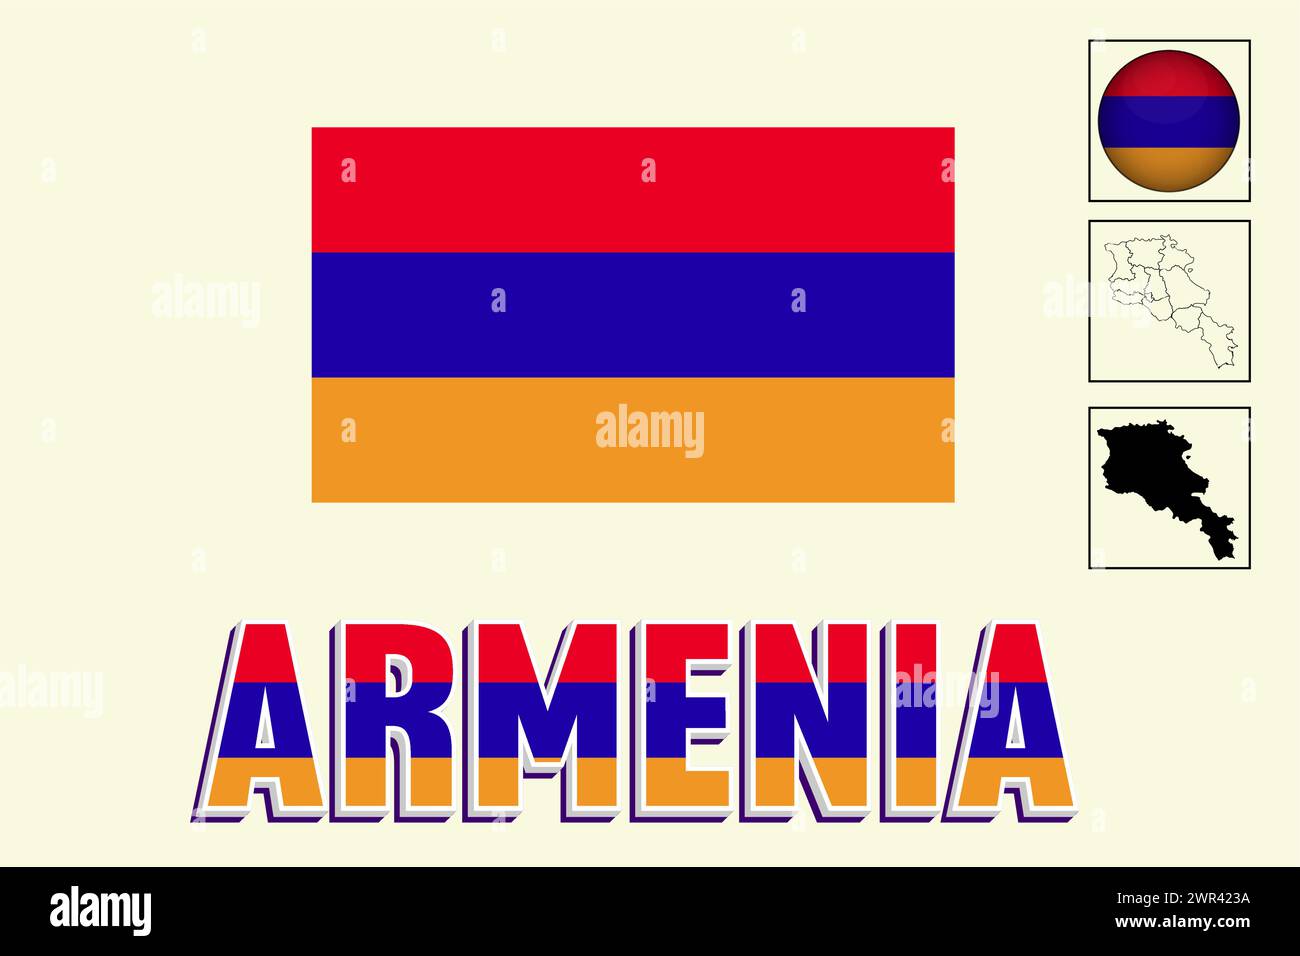 Armenia flag and map in vector illustration Stock Vector